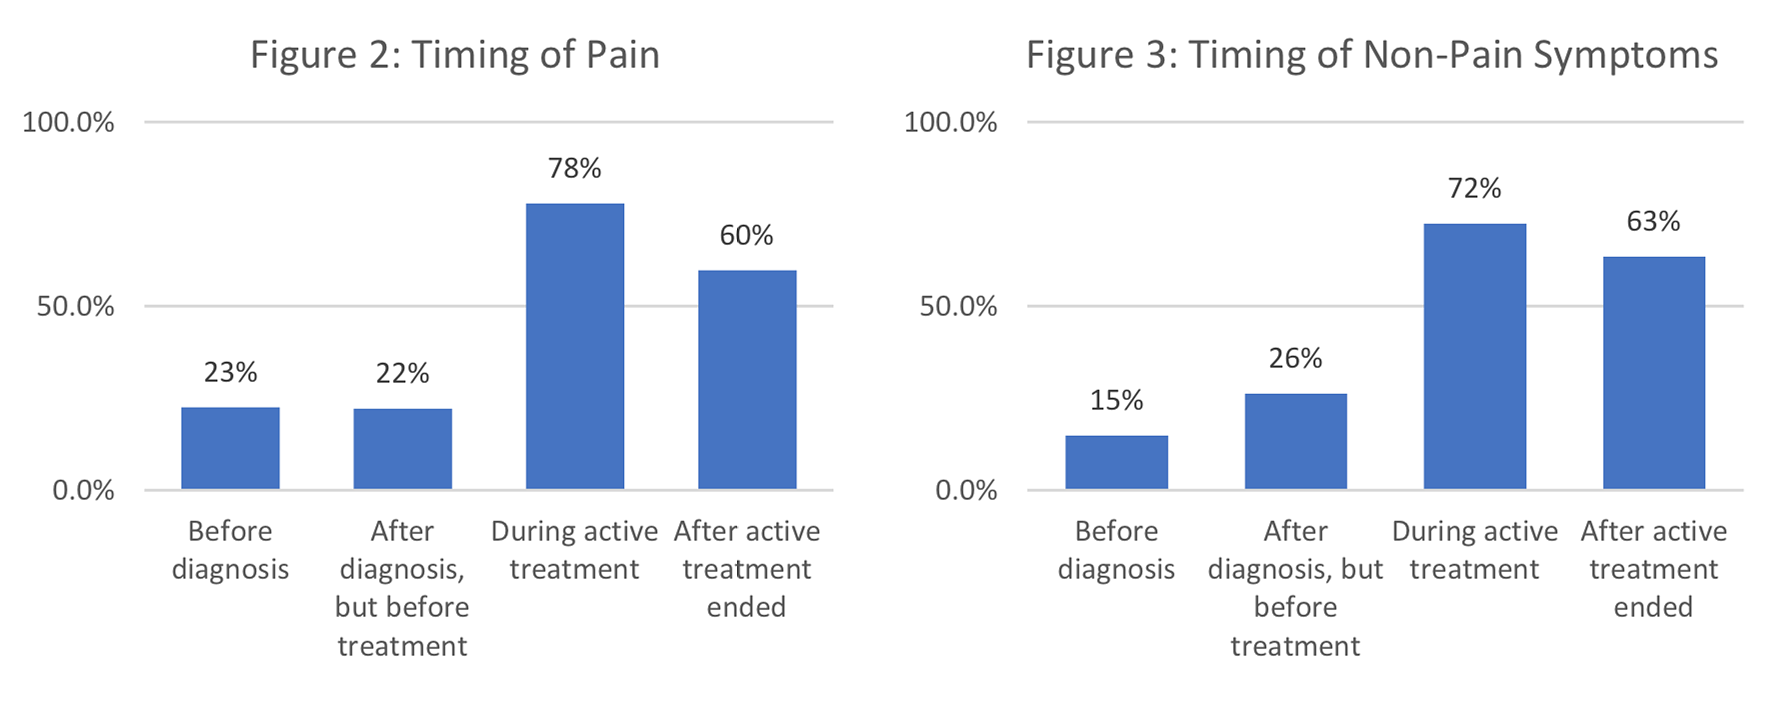 Figure 2: Timing of Pain, Figure 3: Timing of Non-Pain Symptoms